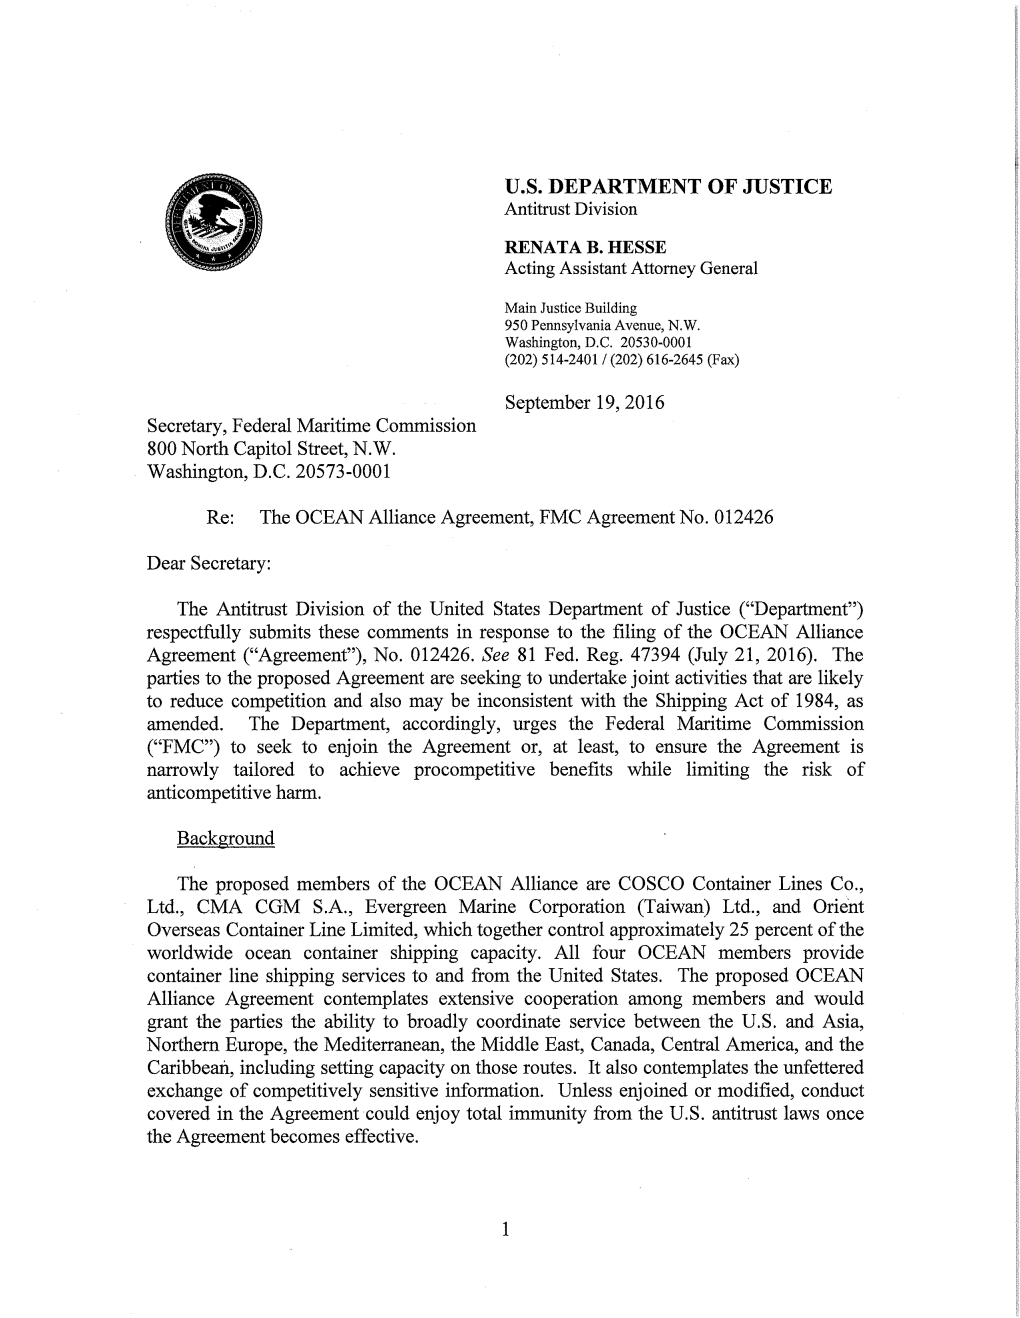 Comments of the U.S. Department of Justice on the OCEAN Alliance